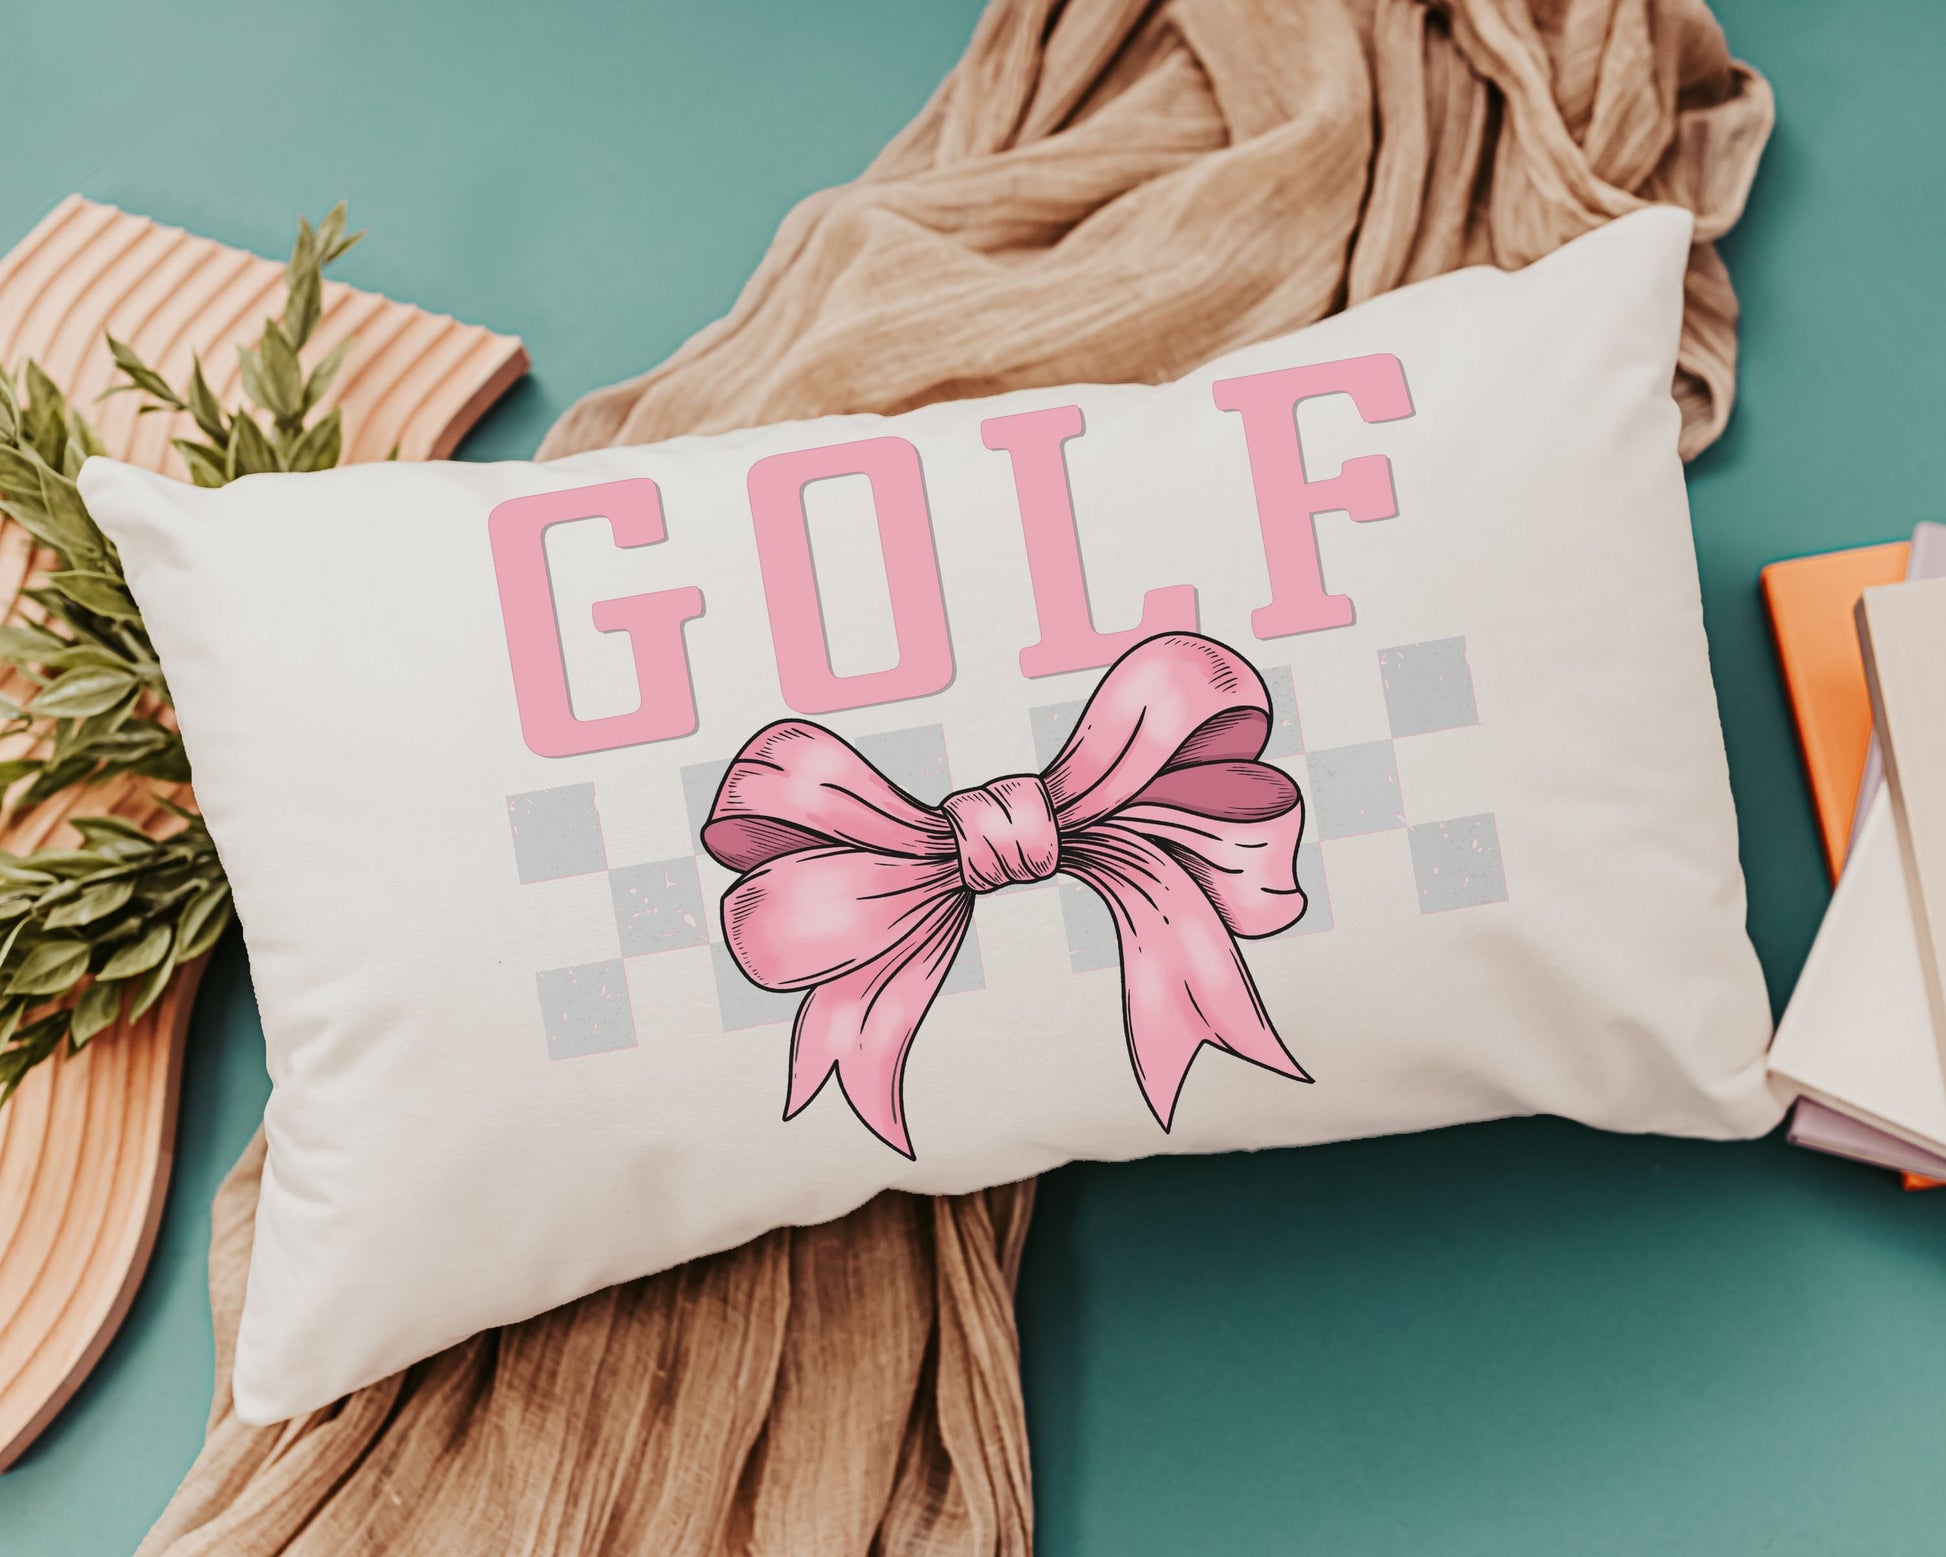 Golf throw pillows for bed